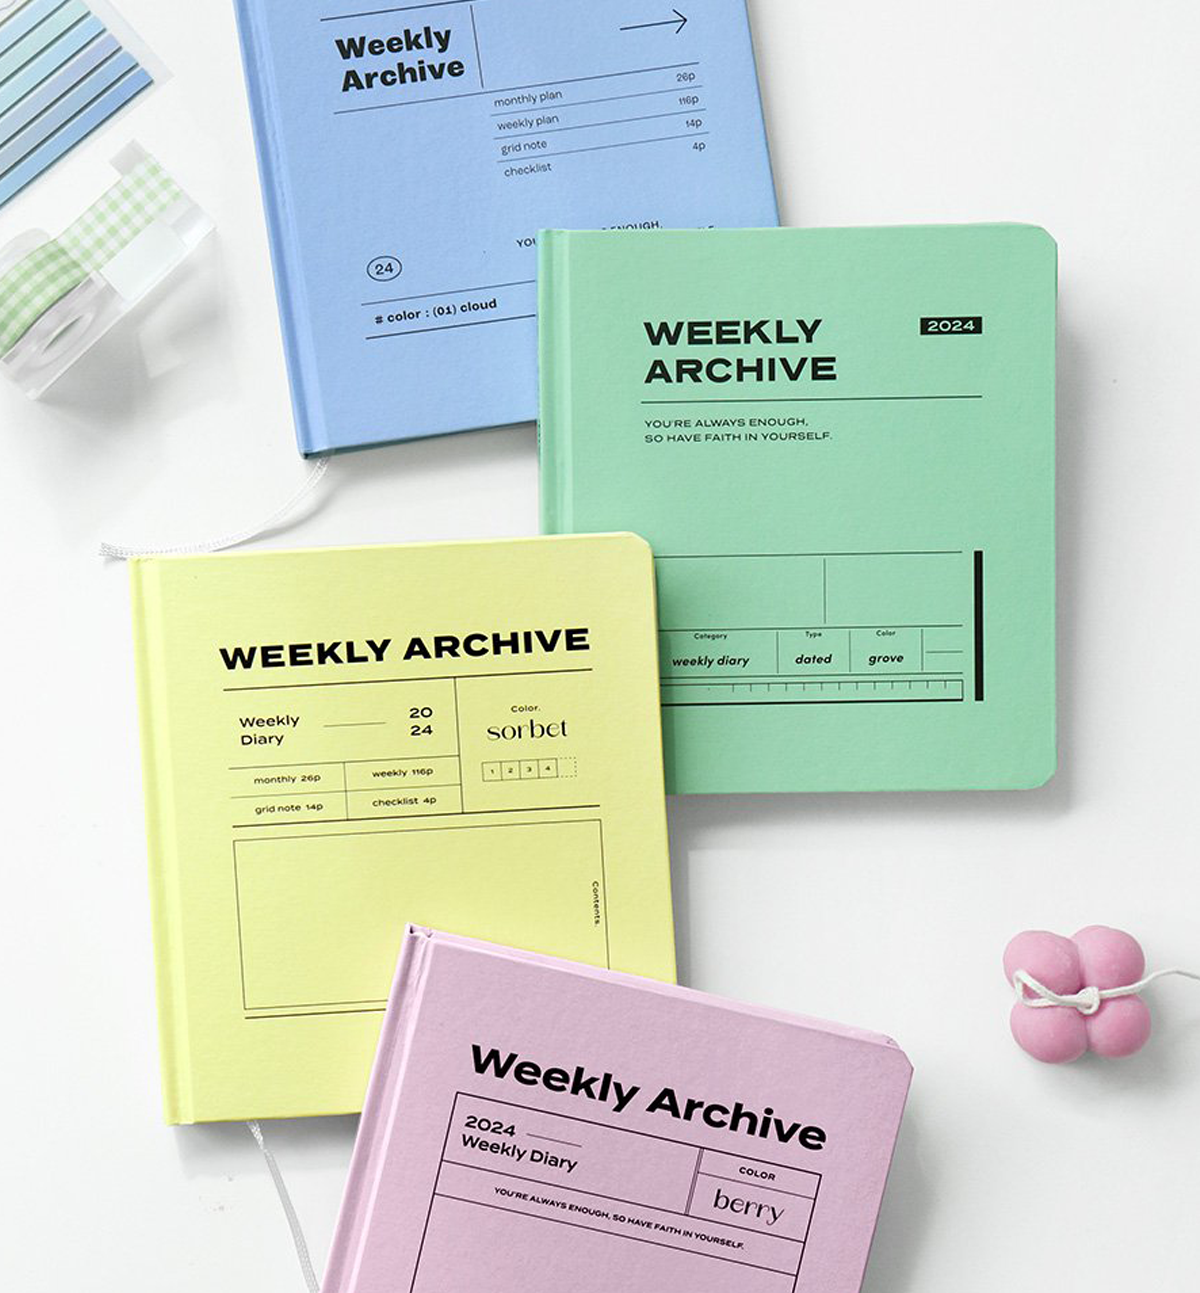 2024 Archive Weekly Planner